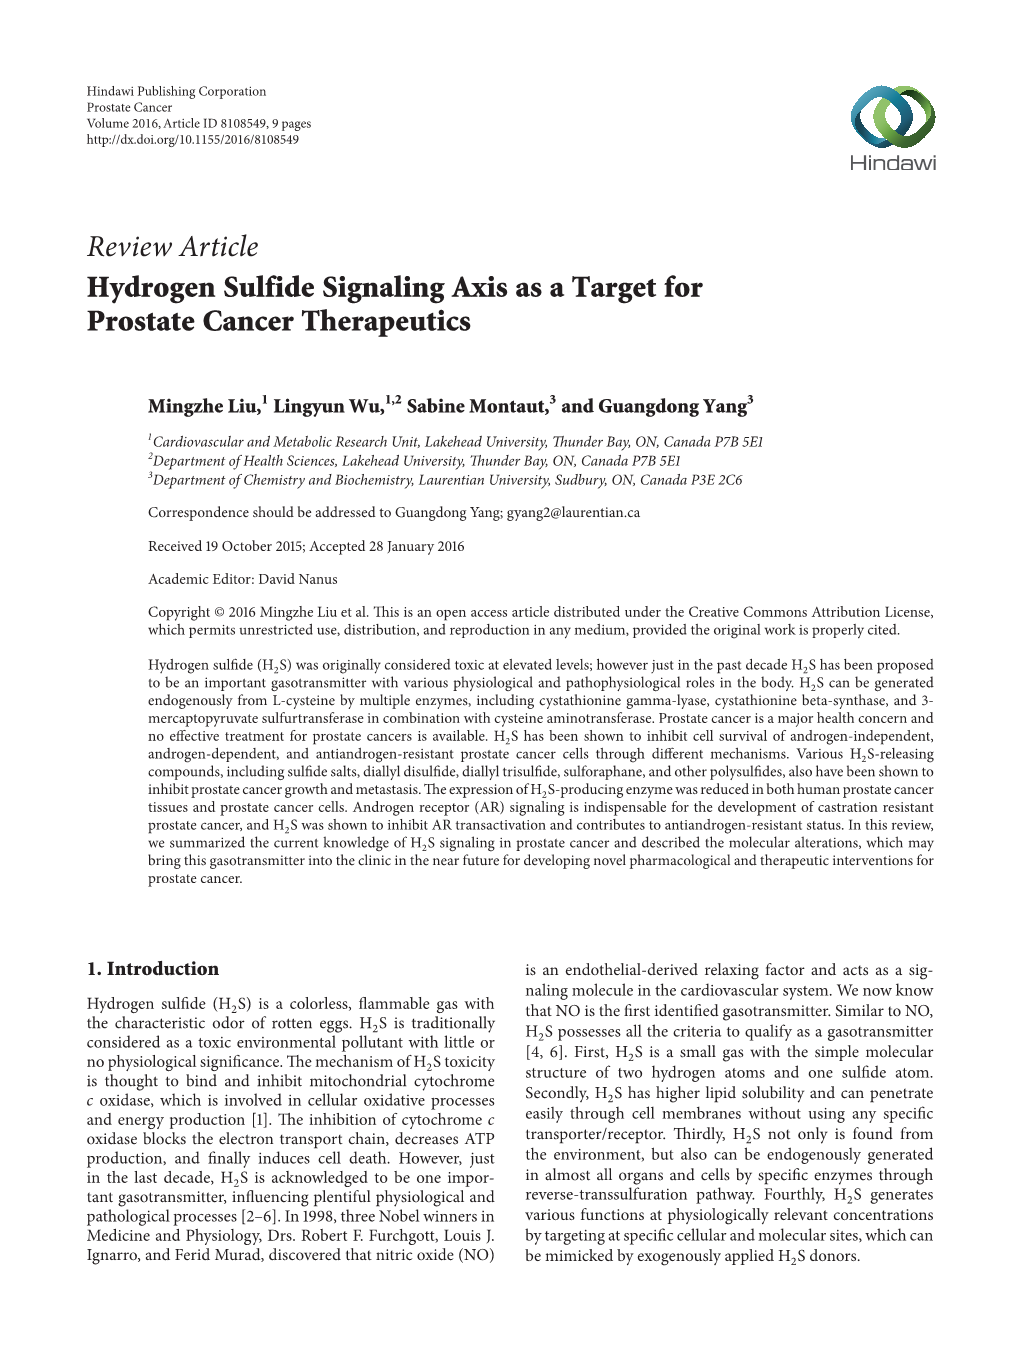 Hydrogen Sulfide Signaling Axis As a Target for Prostate Cancer Therapeutics